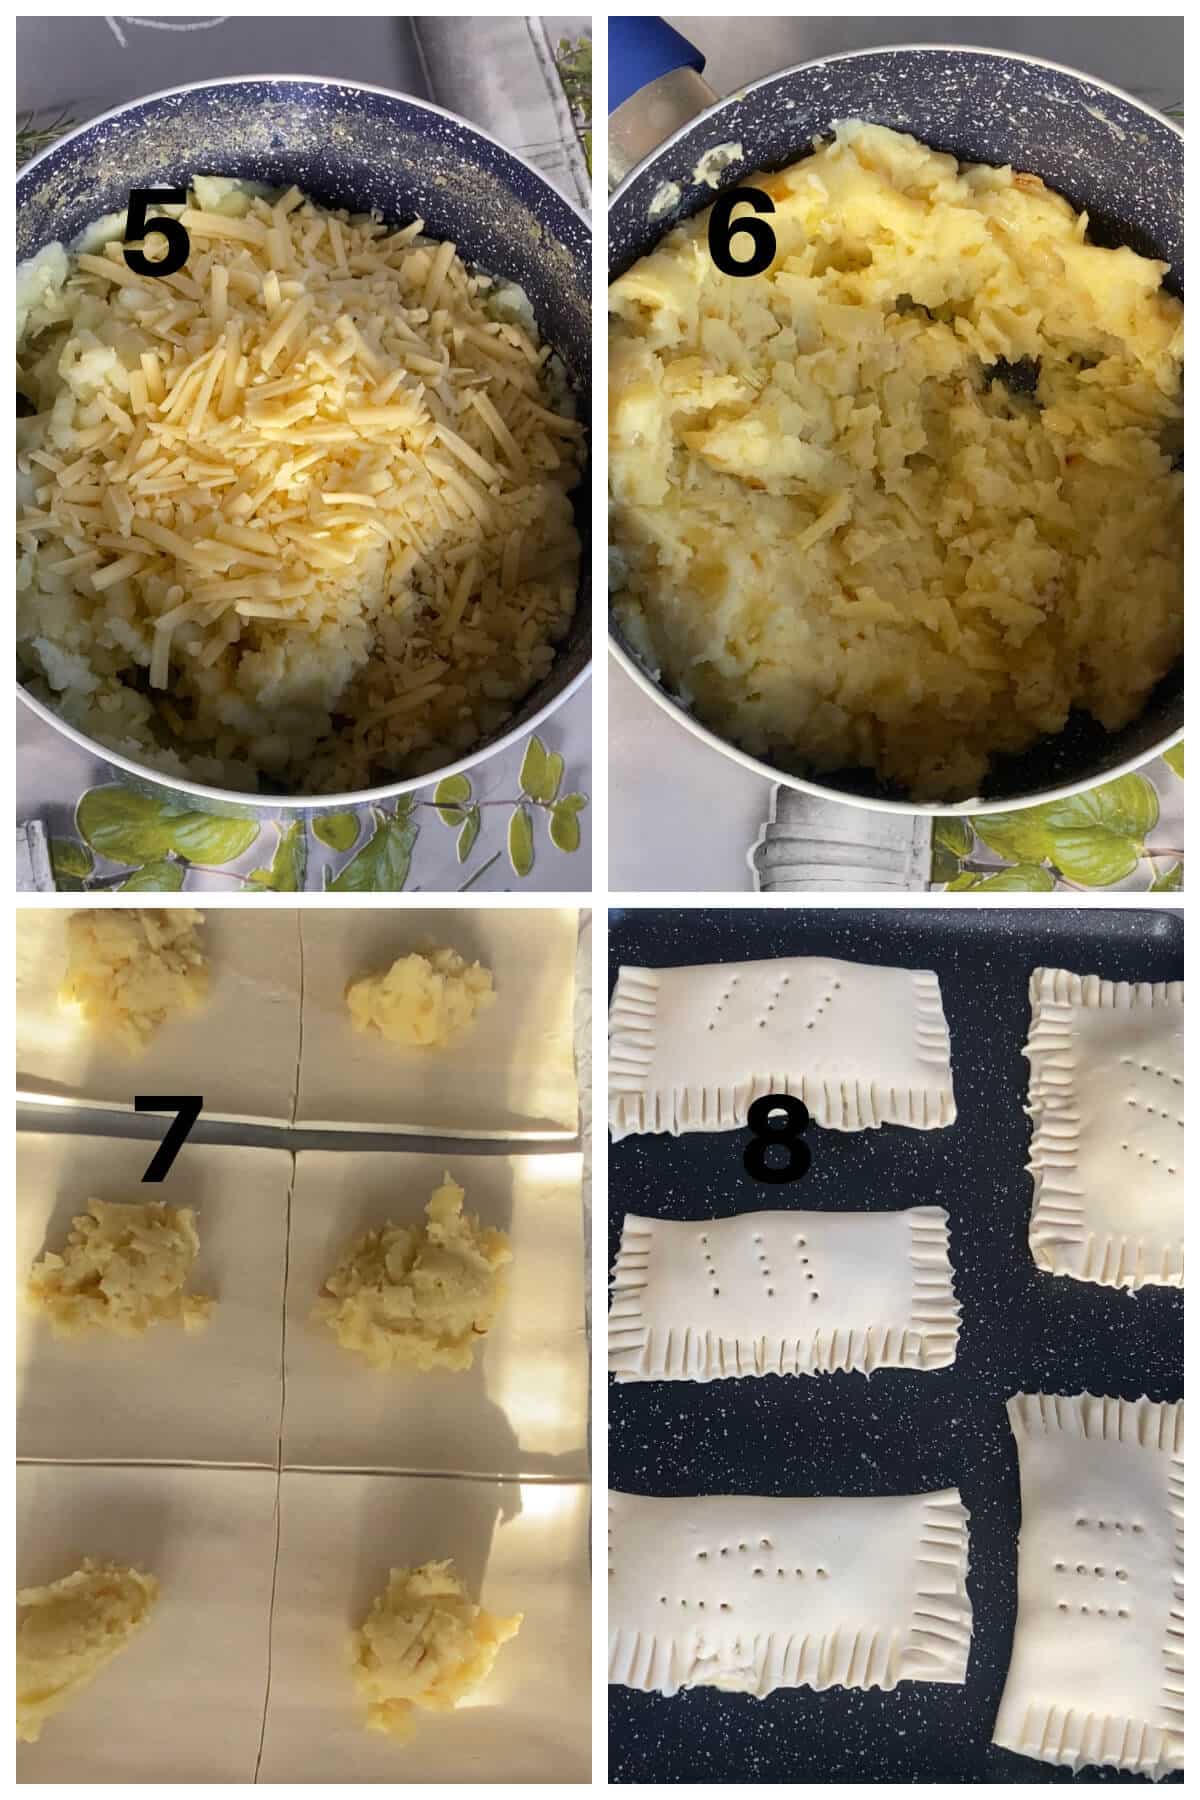 Collage of 4 photos to show how to make pasties with potato, onion and cheese.